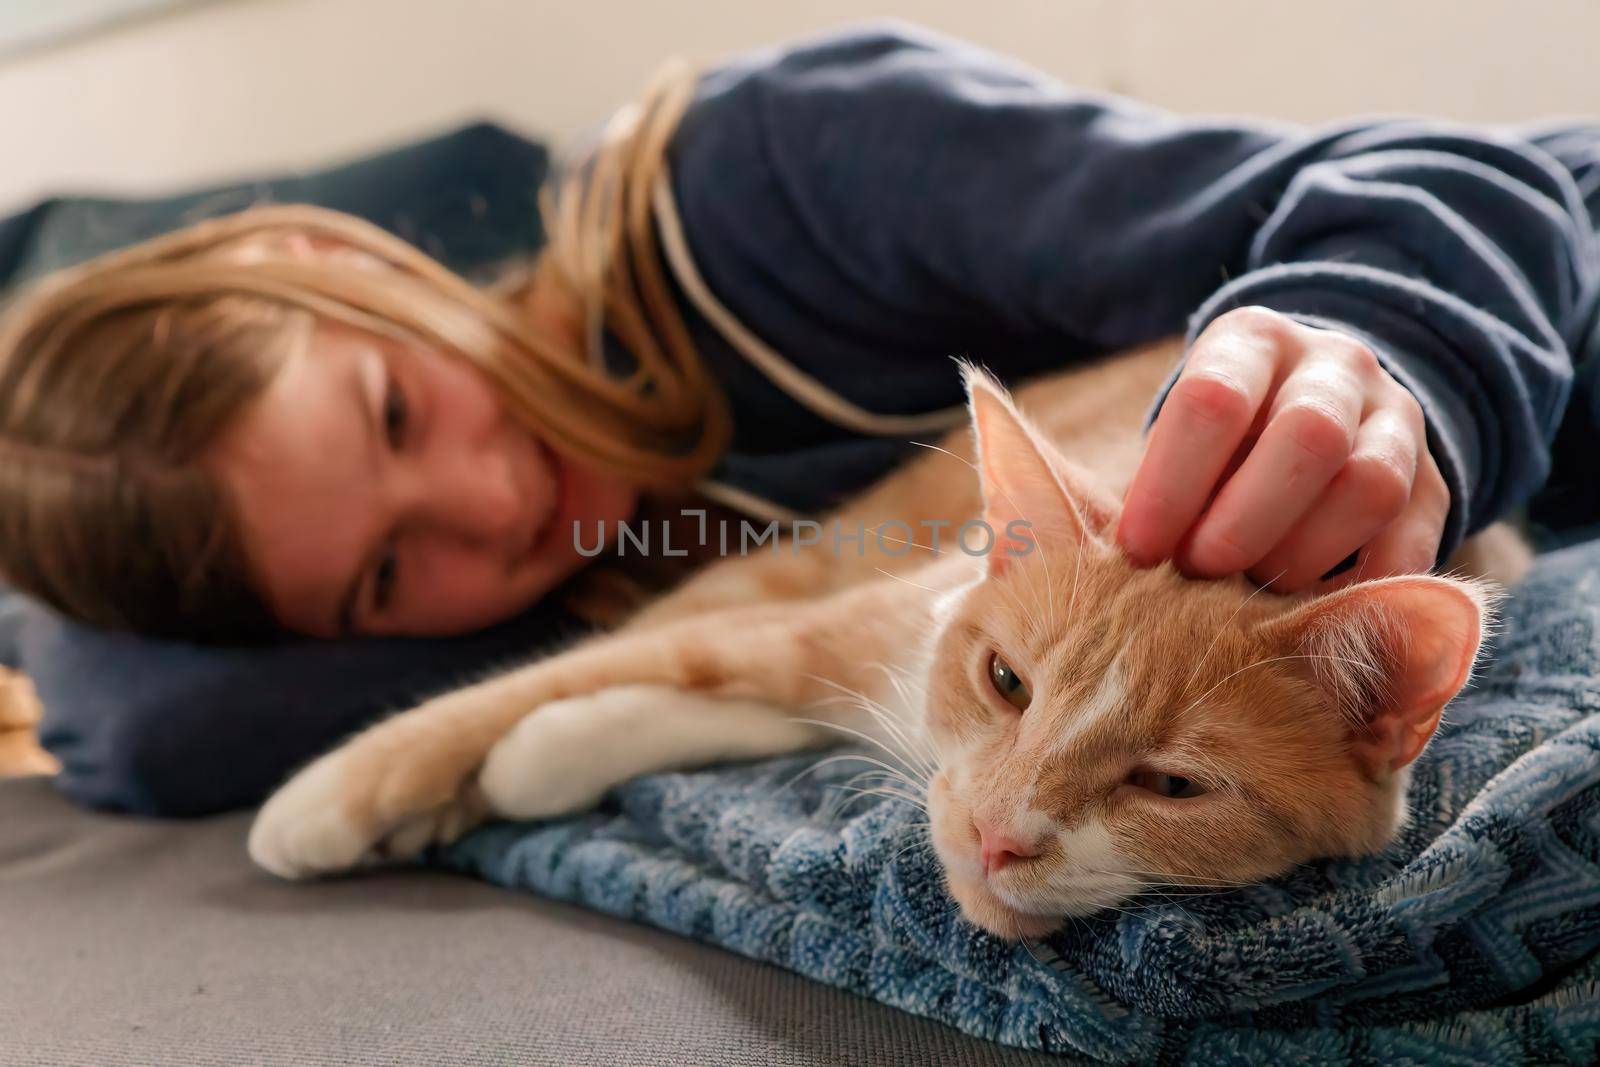 An Young Adolescent girl lying on a couch finds comfort by snuggling close to and petting her tabby cat